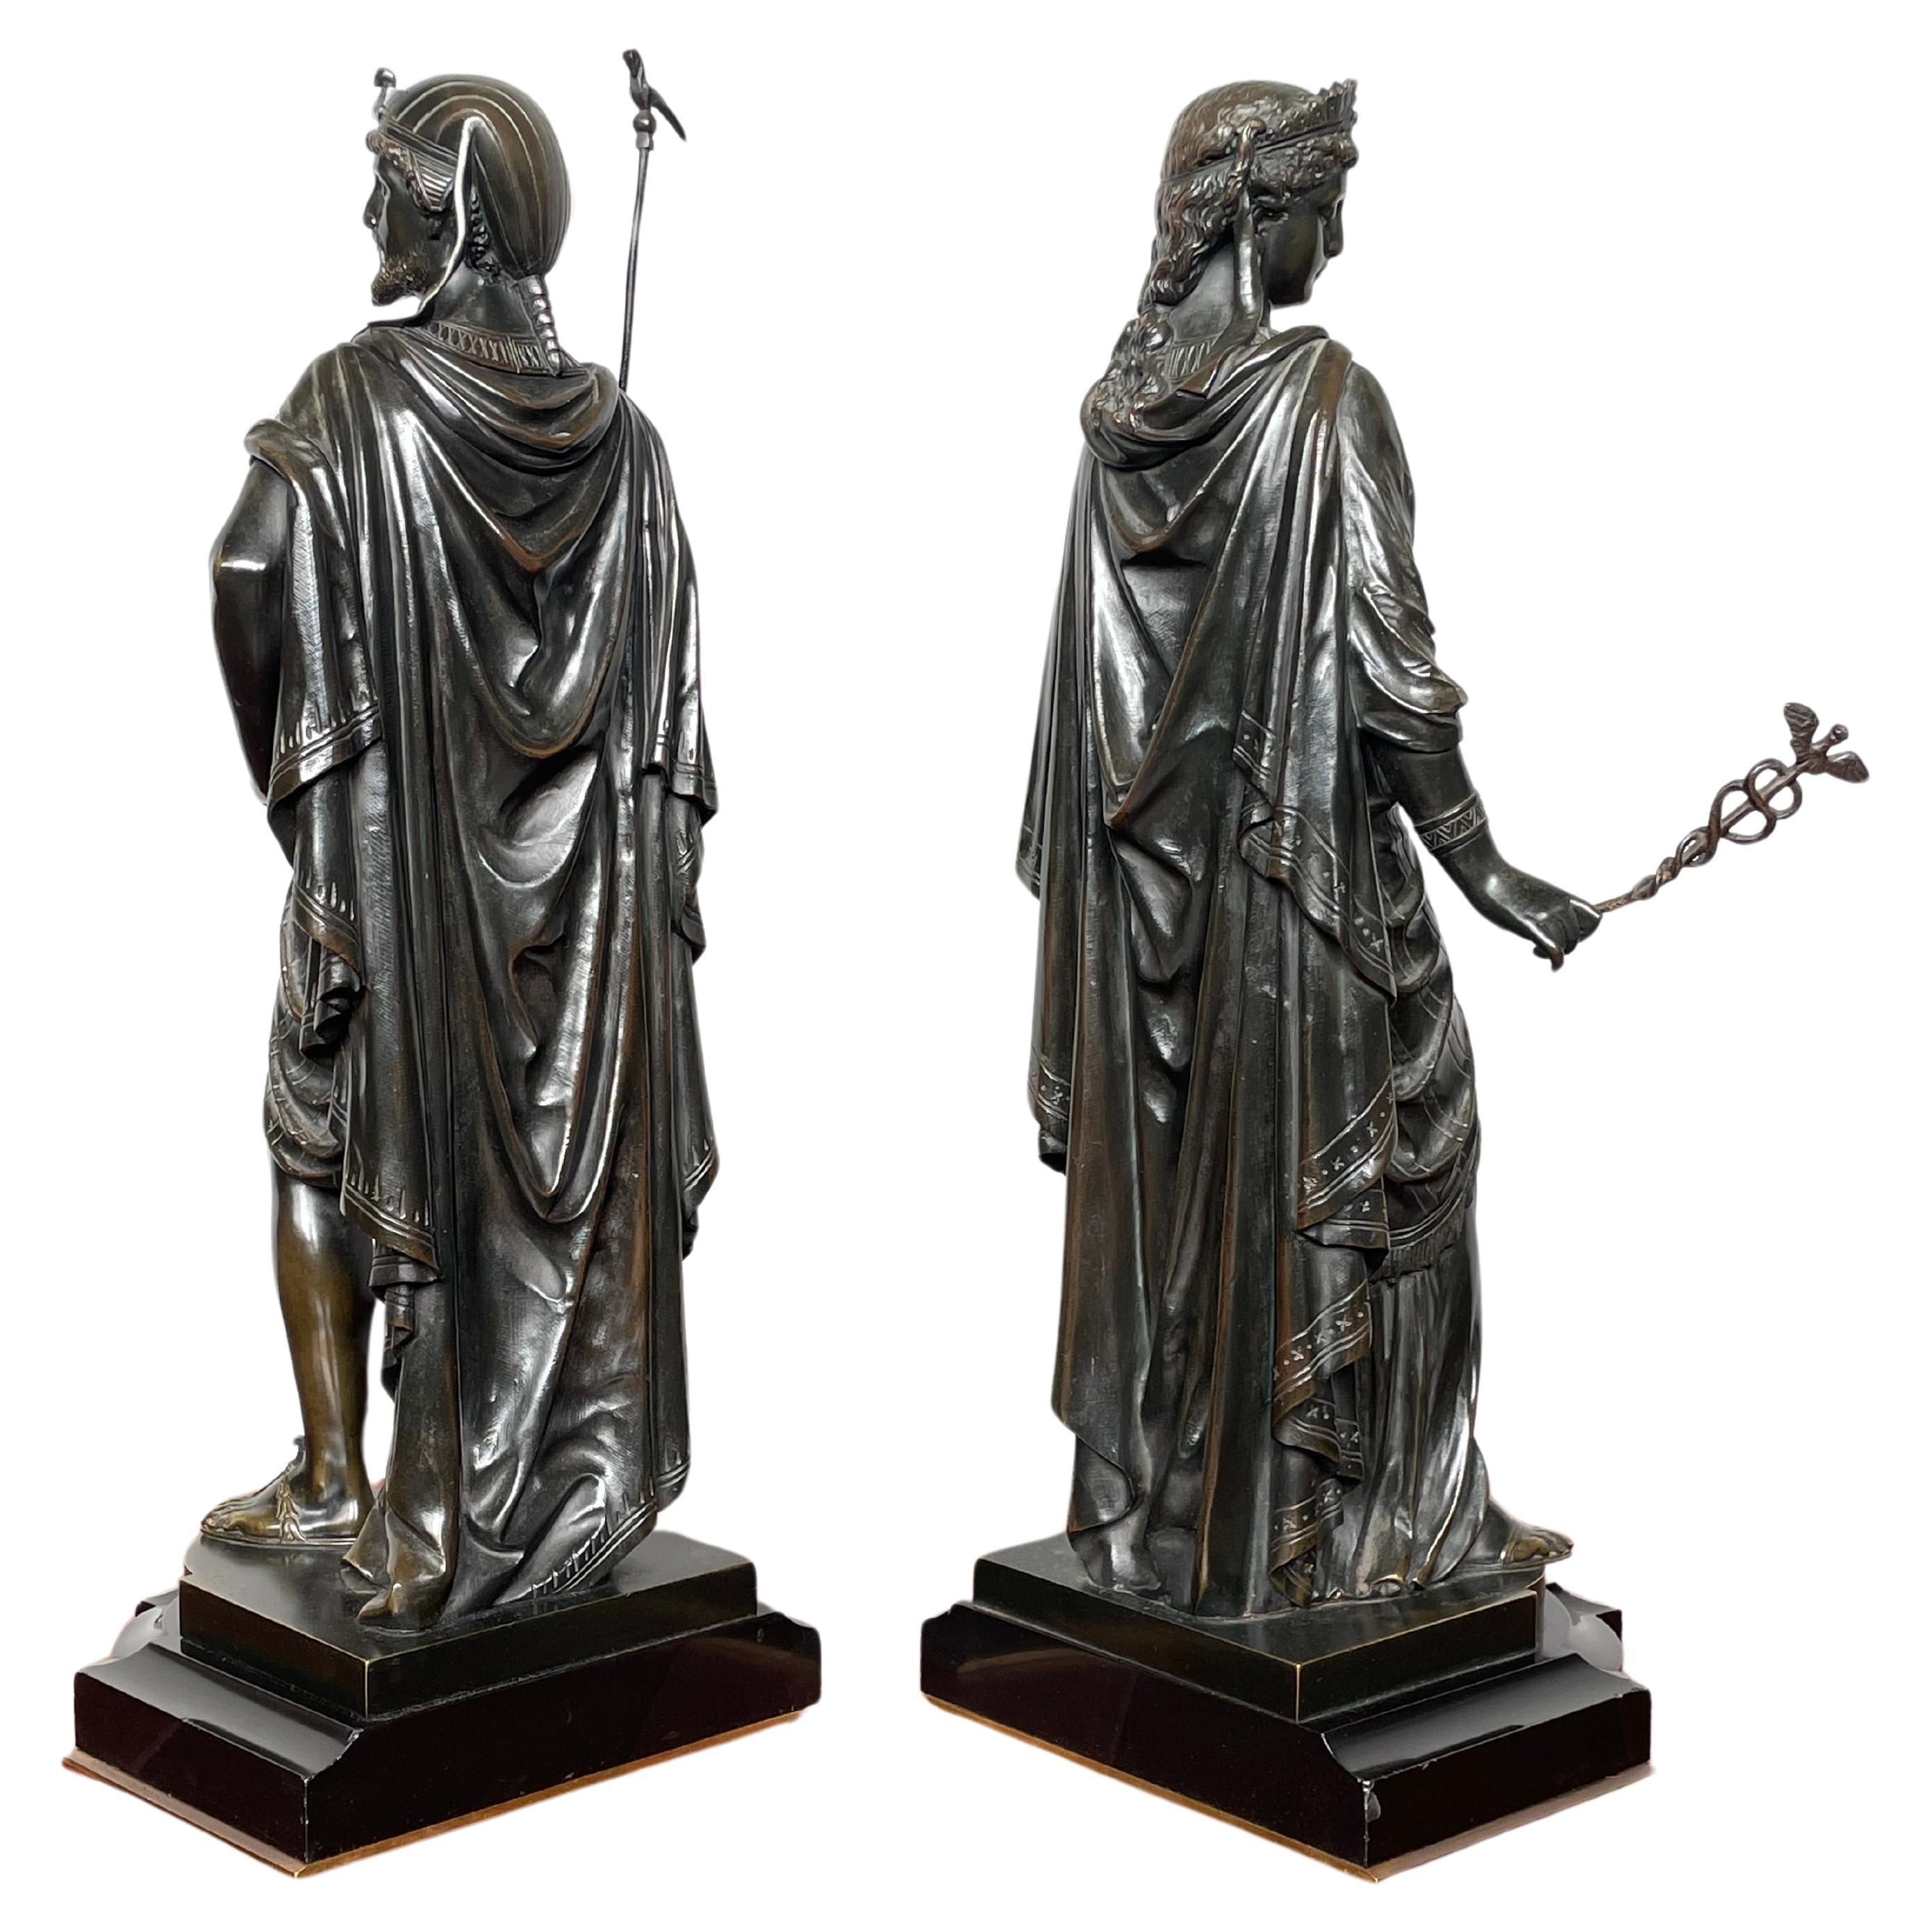 Large Pair of Antique Bronze Egyptian Priest & Priestess Sculptures By E. Bouret For Sale